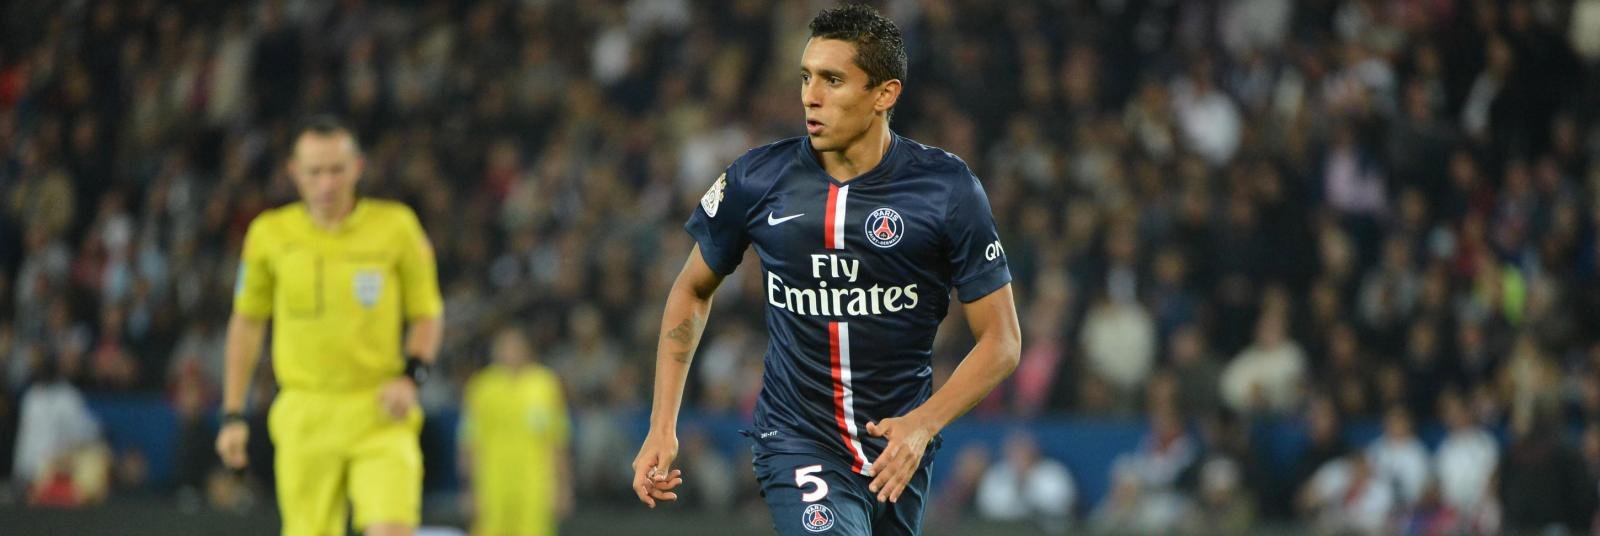 Manchester United, Arsenal and Chelsea tracking 21-year-old Paris Saint-Germain defender